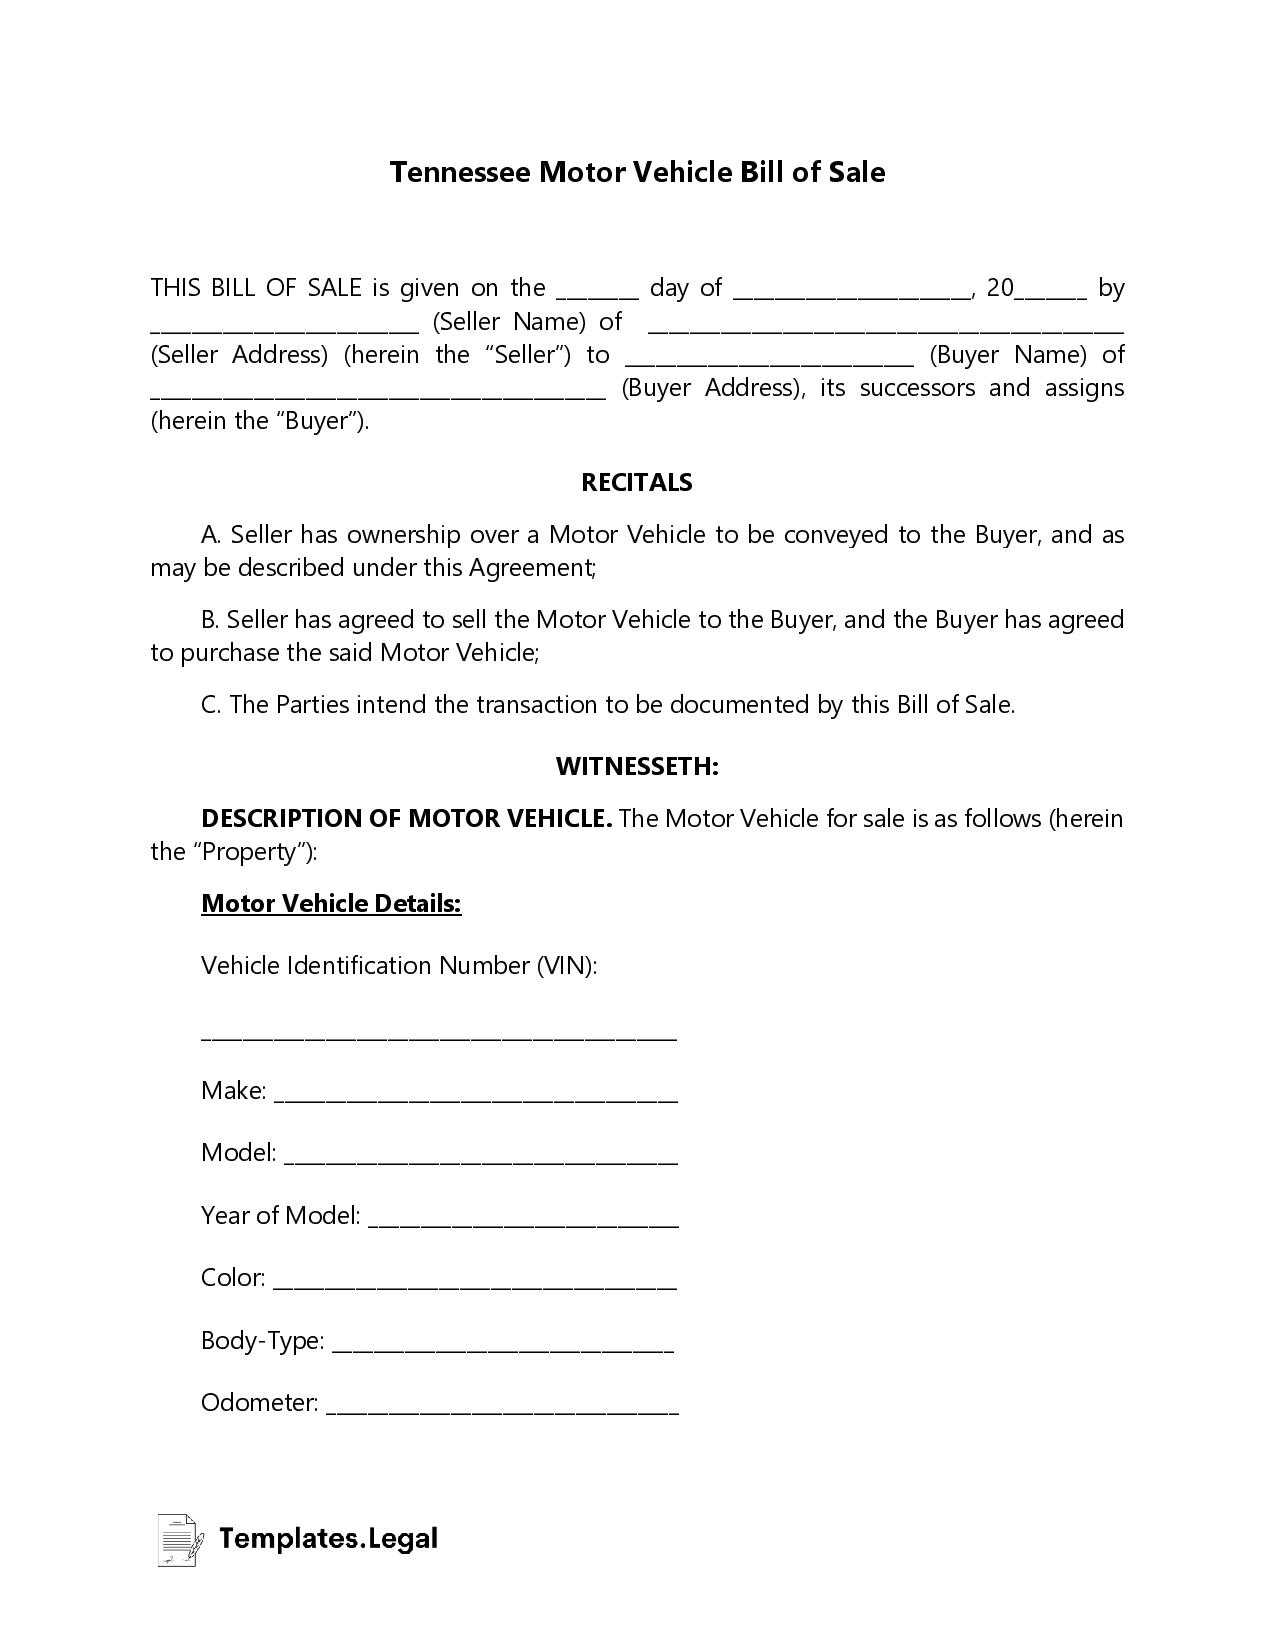 Tennessee Motor Vehicle Bill of Sale - Templates.Legal